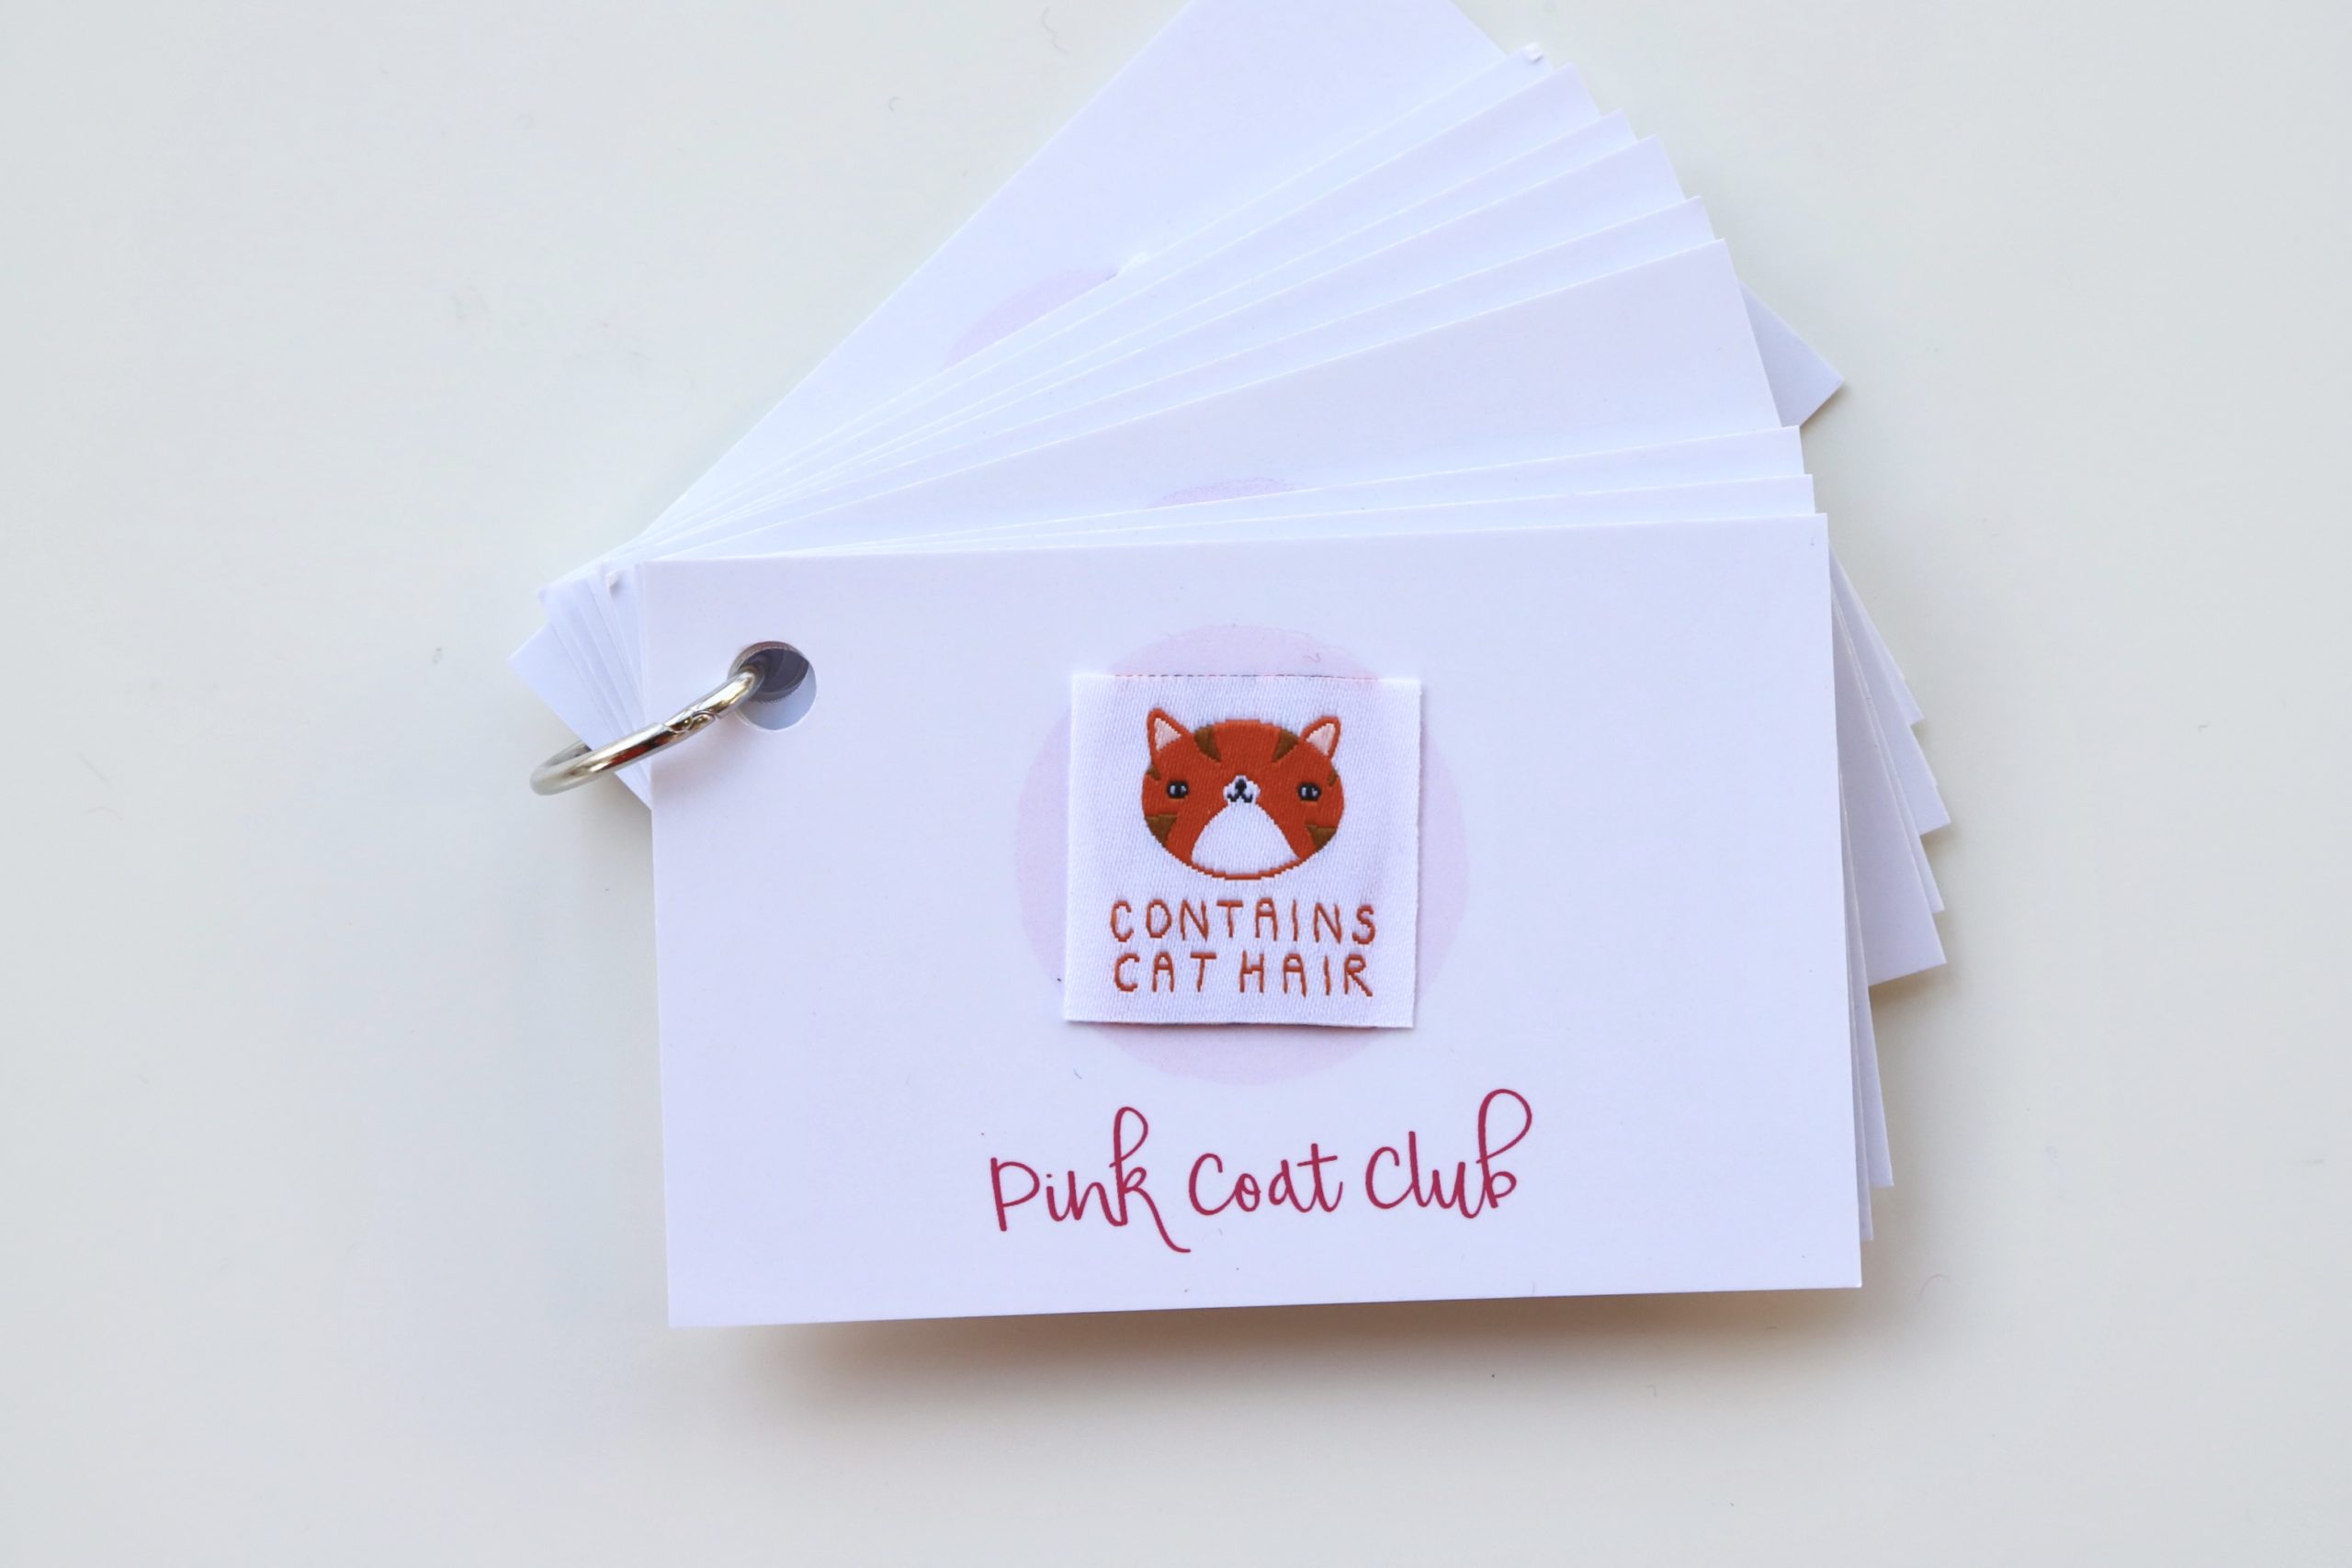 Contains Cat Hair (Ginger) – 6 Garment Labels by Pink Coat Club